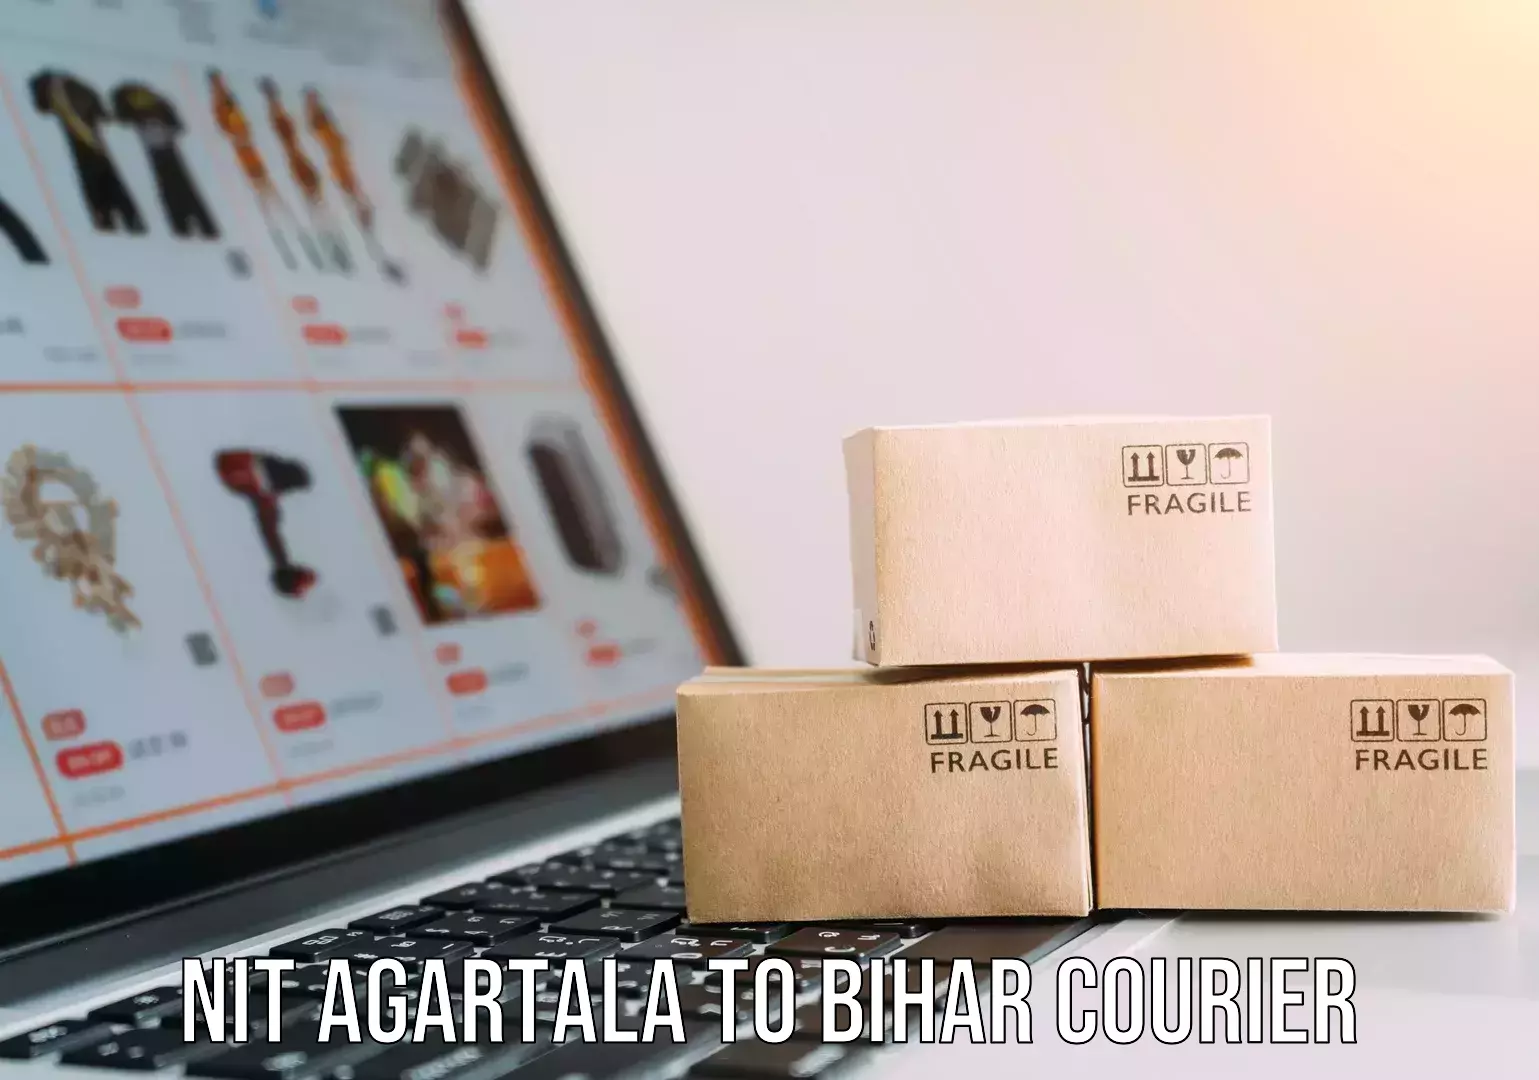 Express delivery solutions NIT Agartala to Bihar